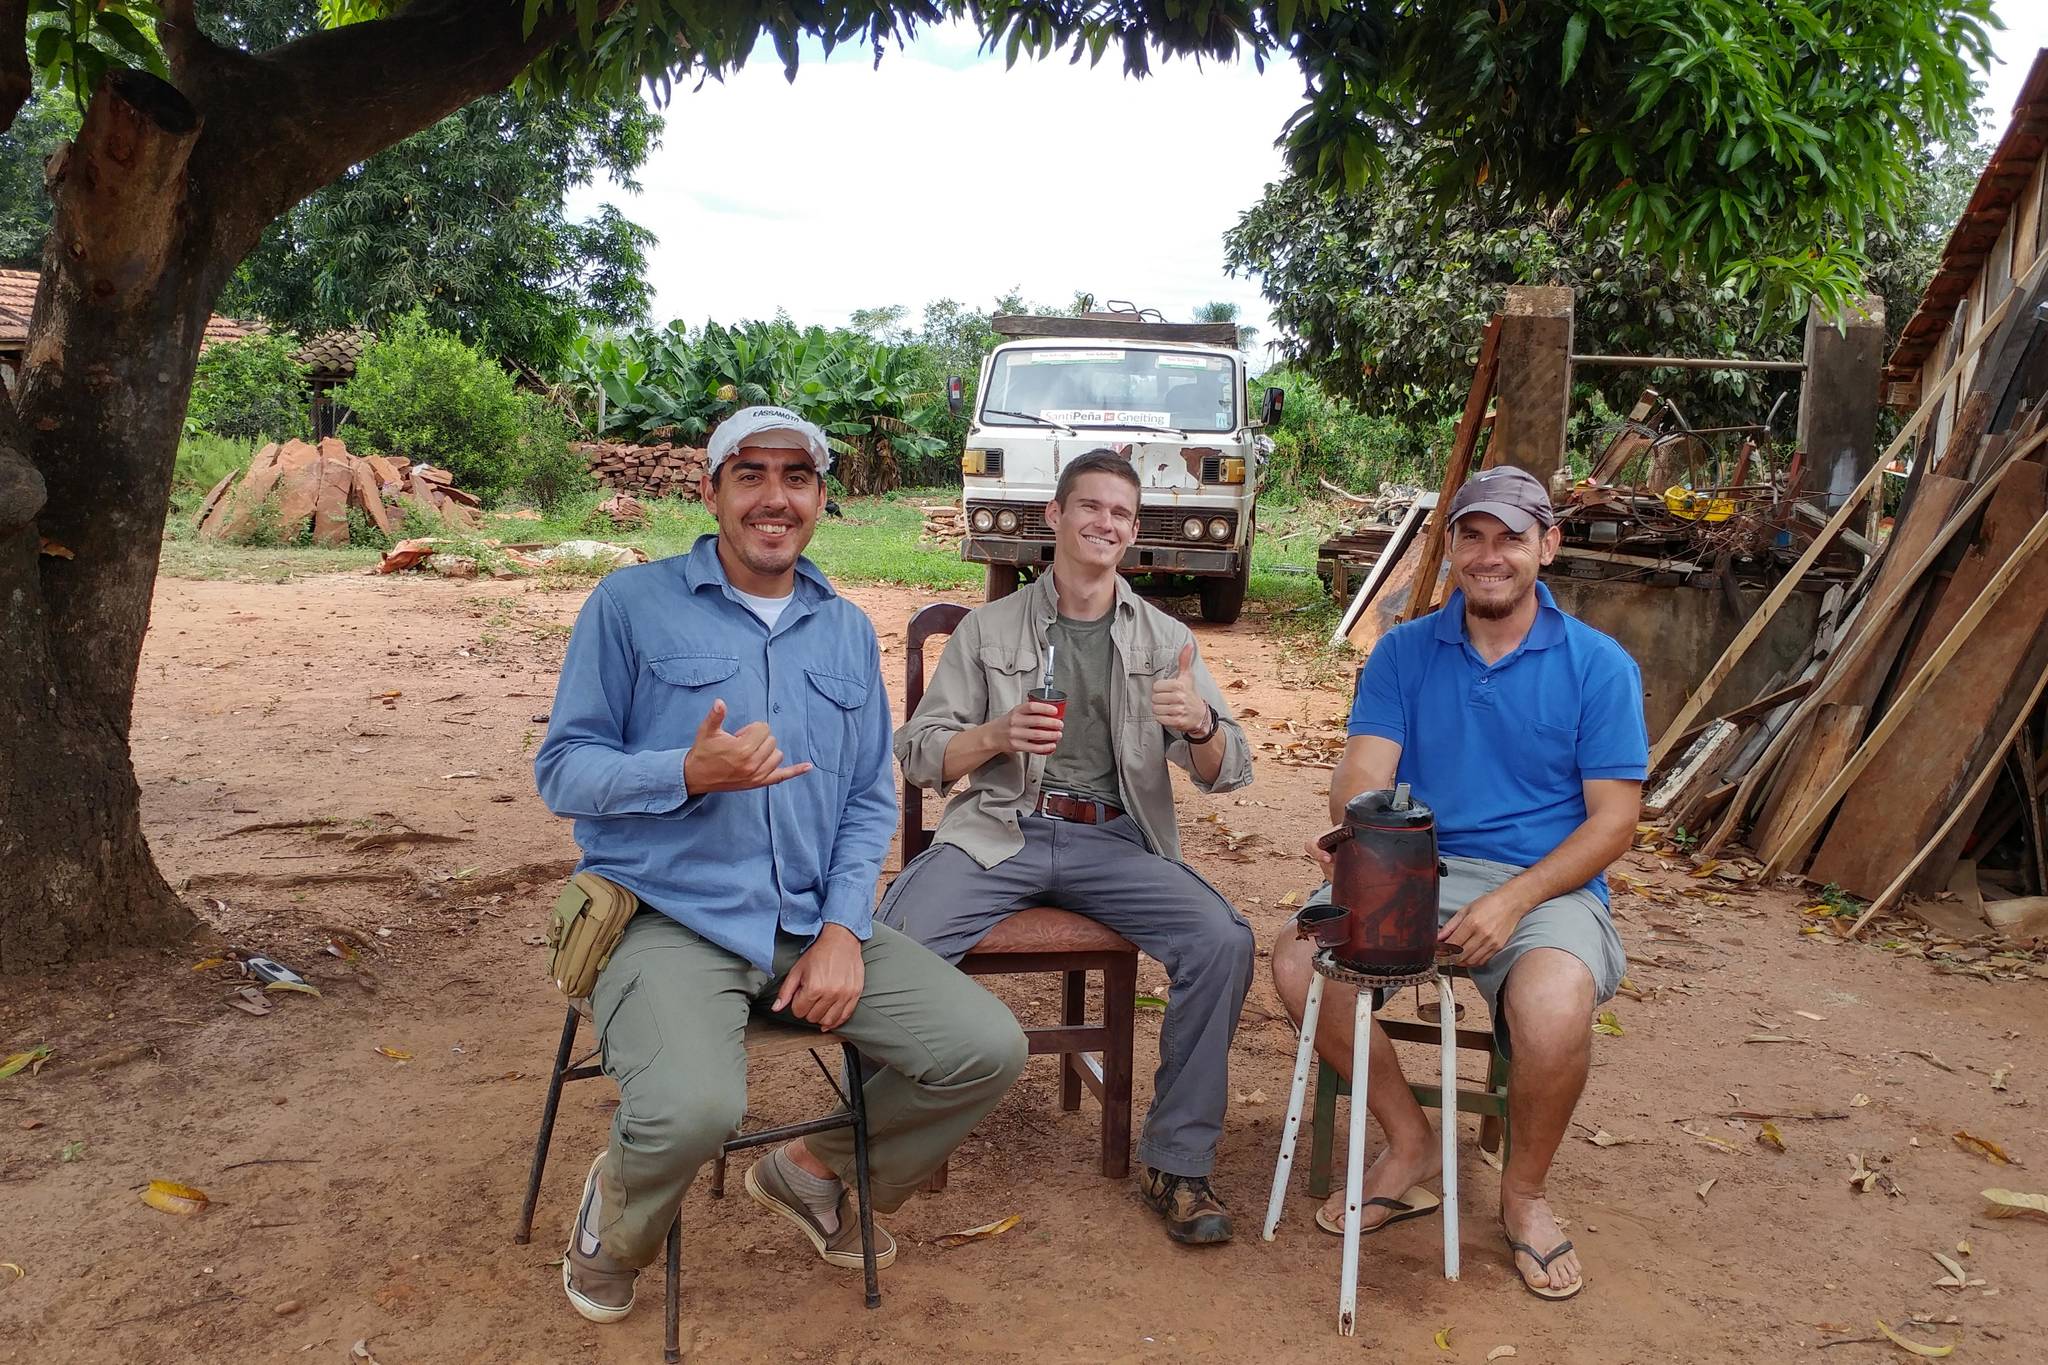 From left, Ramón Ferreira, Brandon Gustafson and Antonio Ramirez smile for the camera in San Cosme Y Damián, Itapuá District, Paraguay in this undated photo. Gustafson is a Peace Corps volunteer who has helped tour guides Ferreira and Ramirez develop and promote sustainable eco-tourism in San Cosme. (Courtesy Brandon Gustafson)